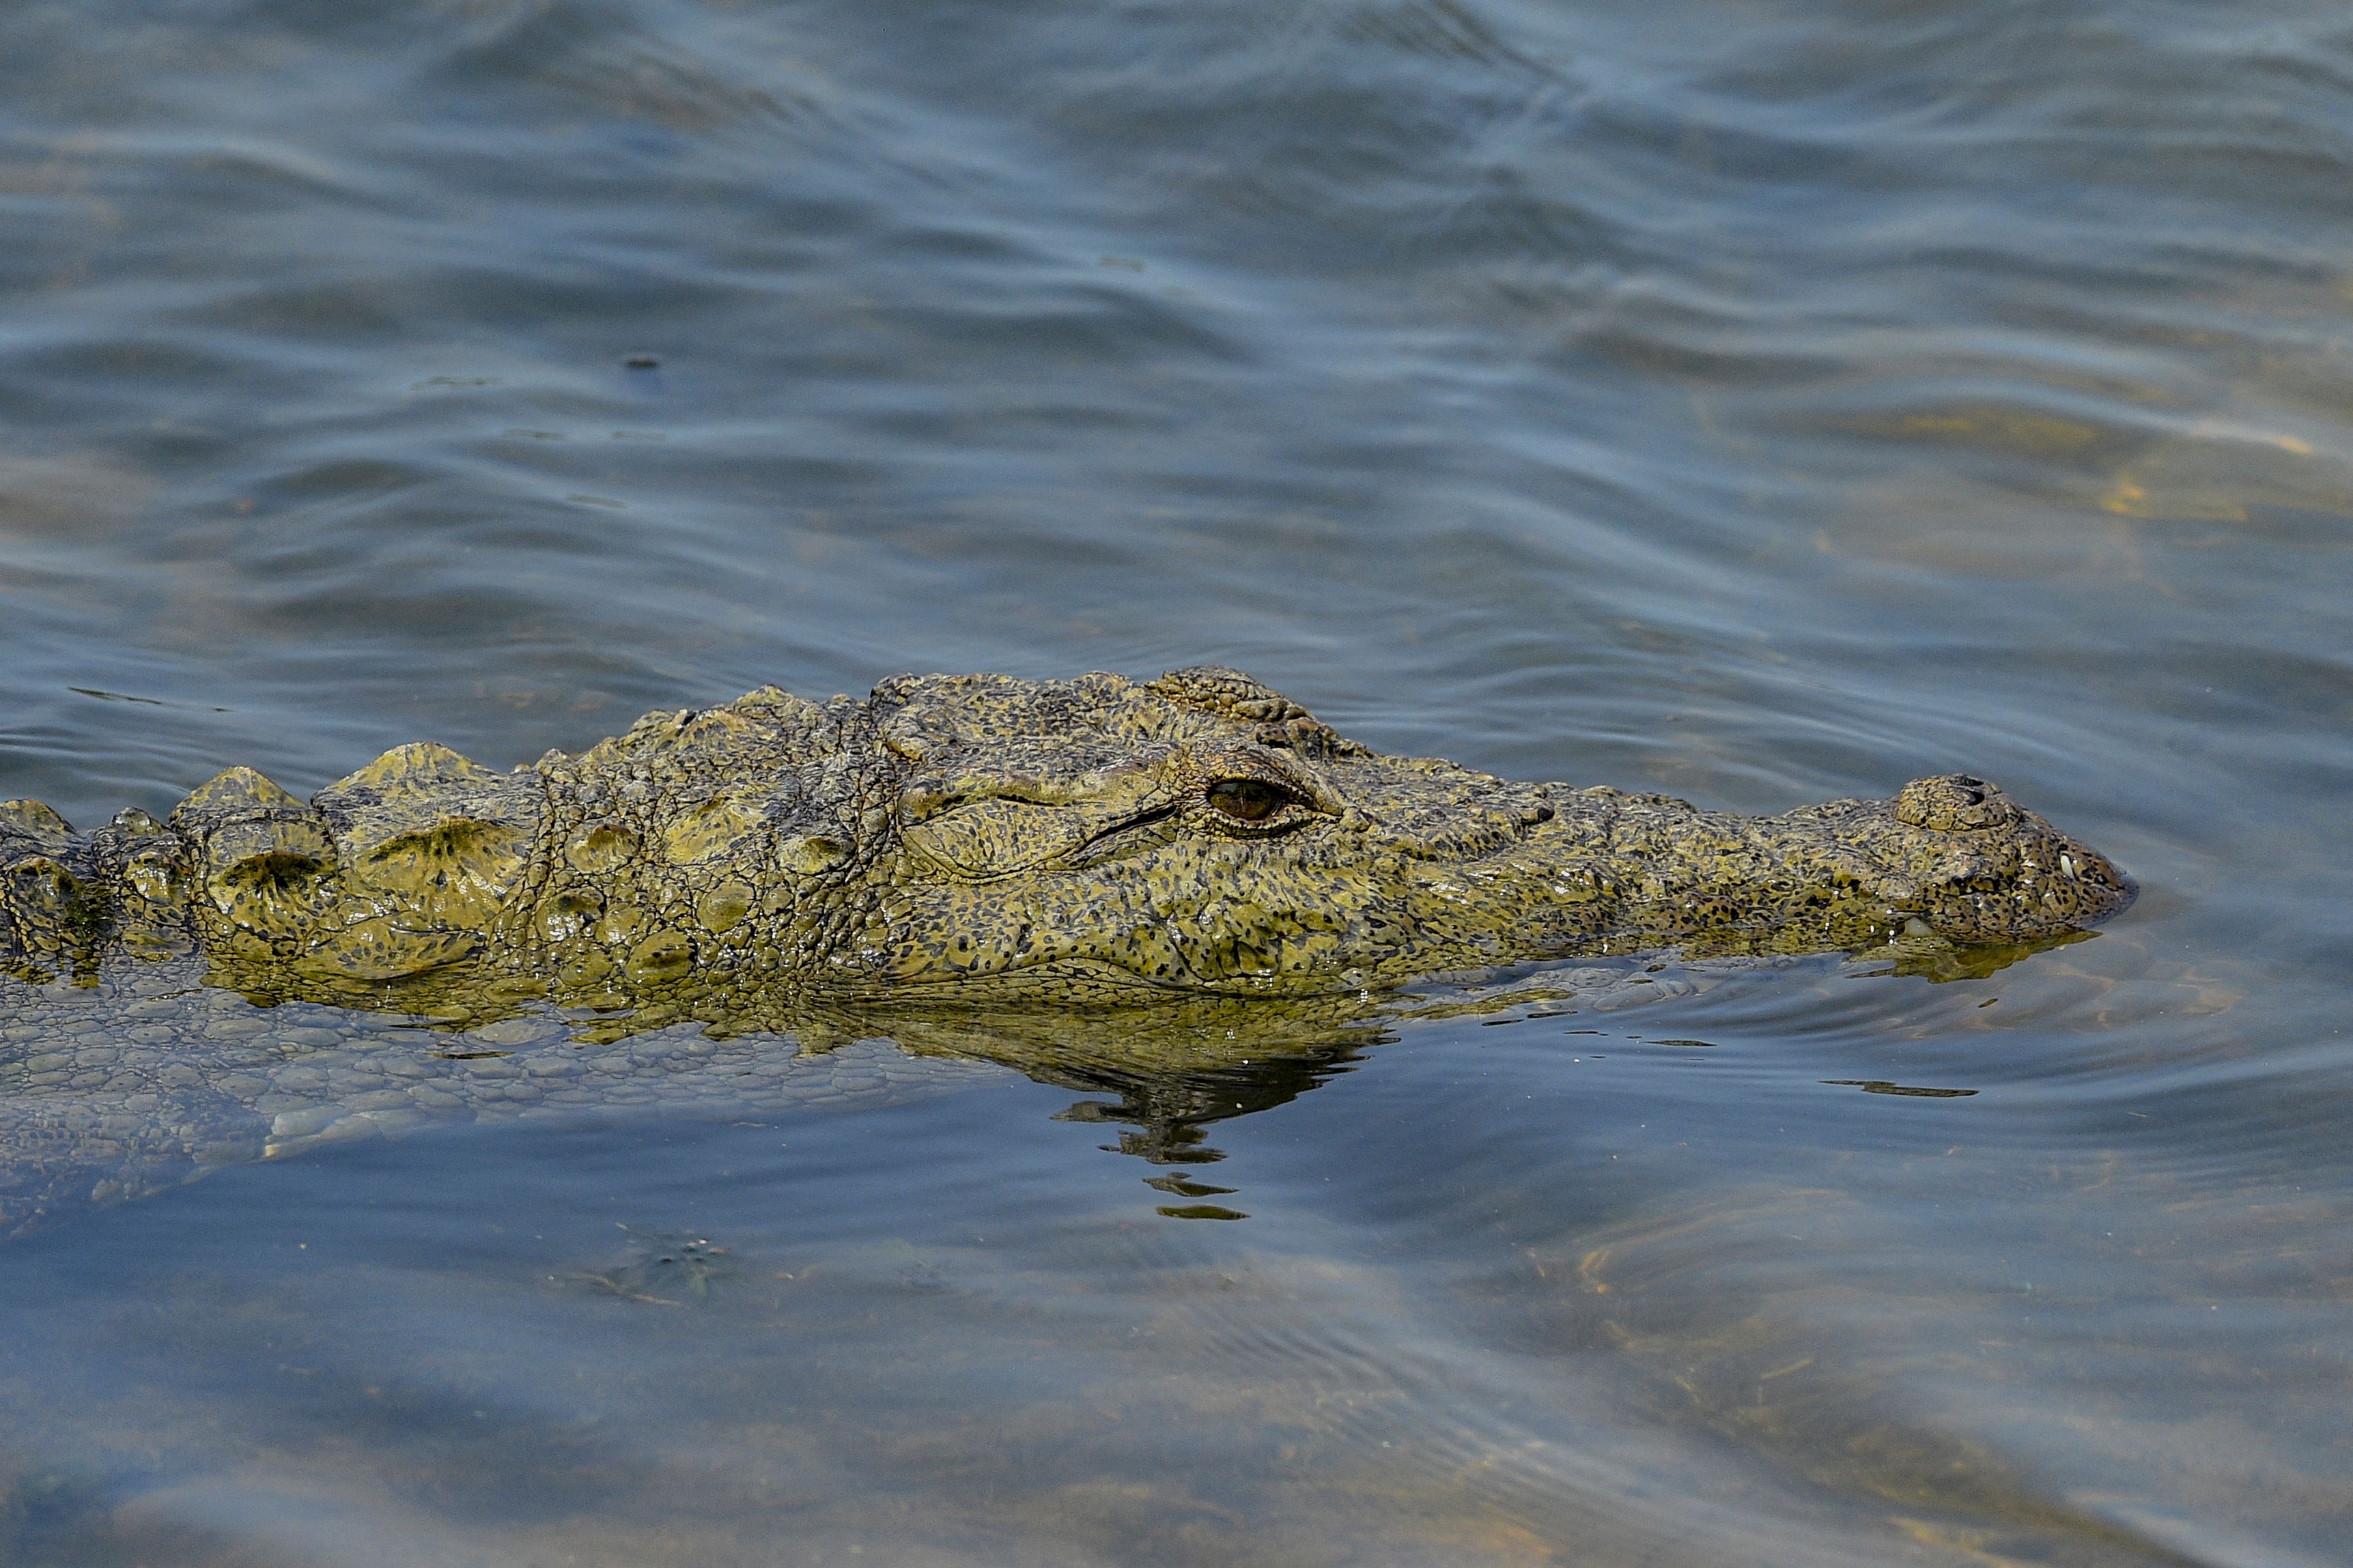 Teenager Attacked And Pulled Underwater By Crocodile On Vacation In Mexico